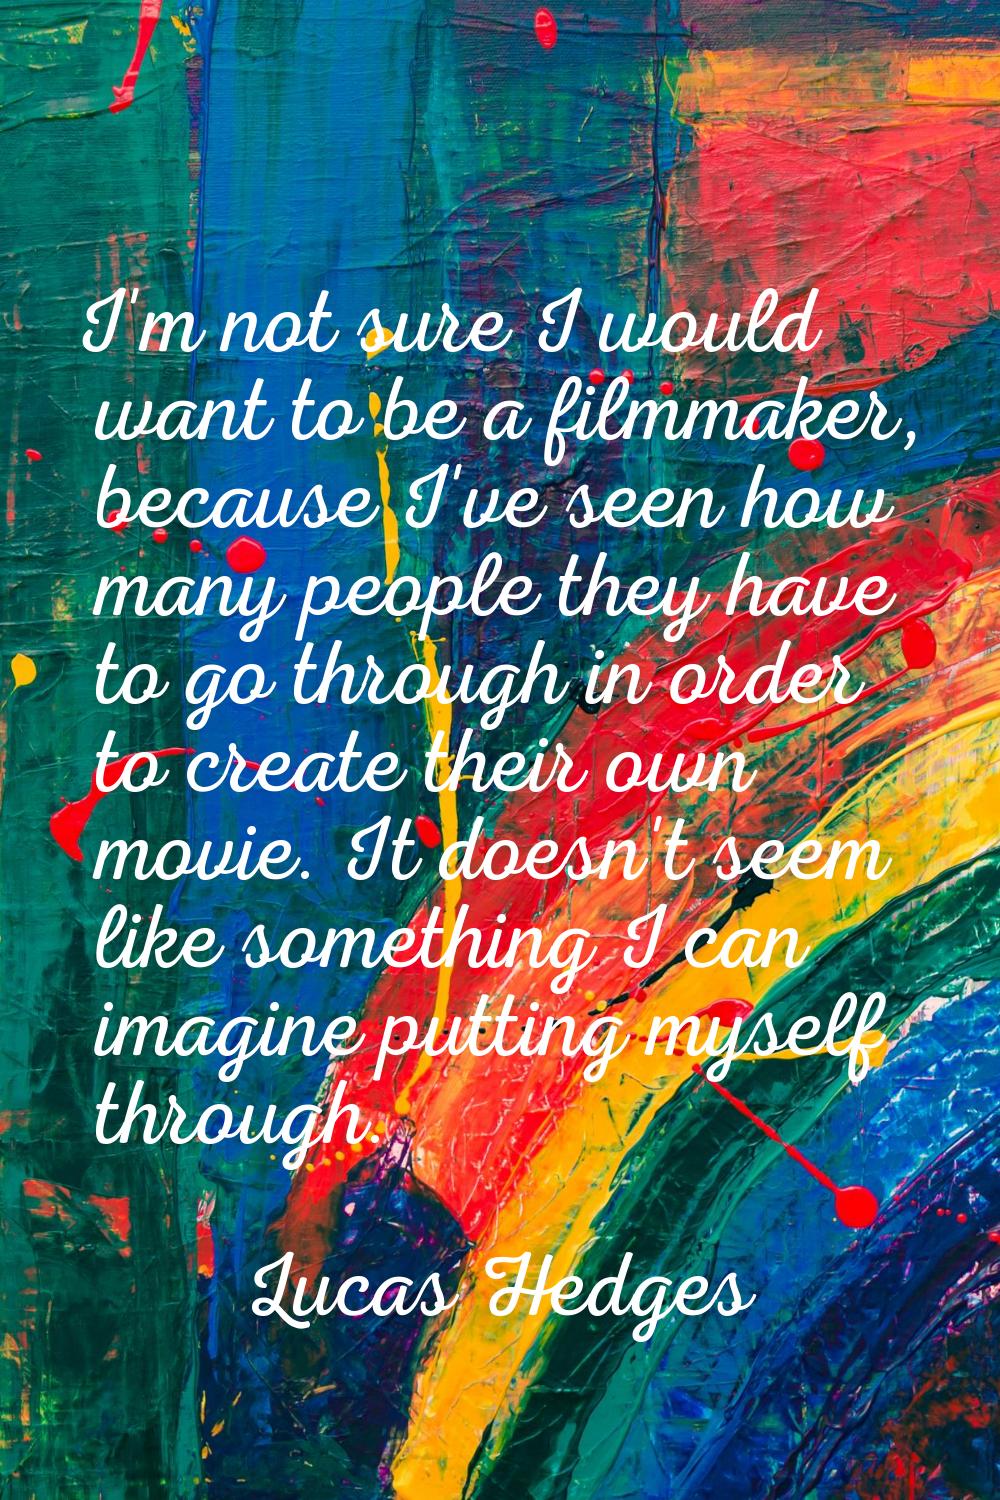 I'm not sure I would want to be a filmmaker, because I've seen how many people they have to go thro